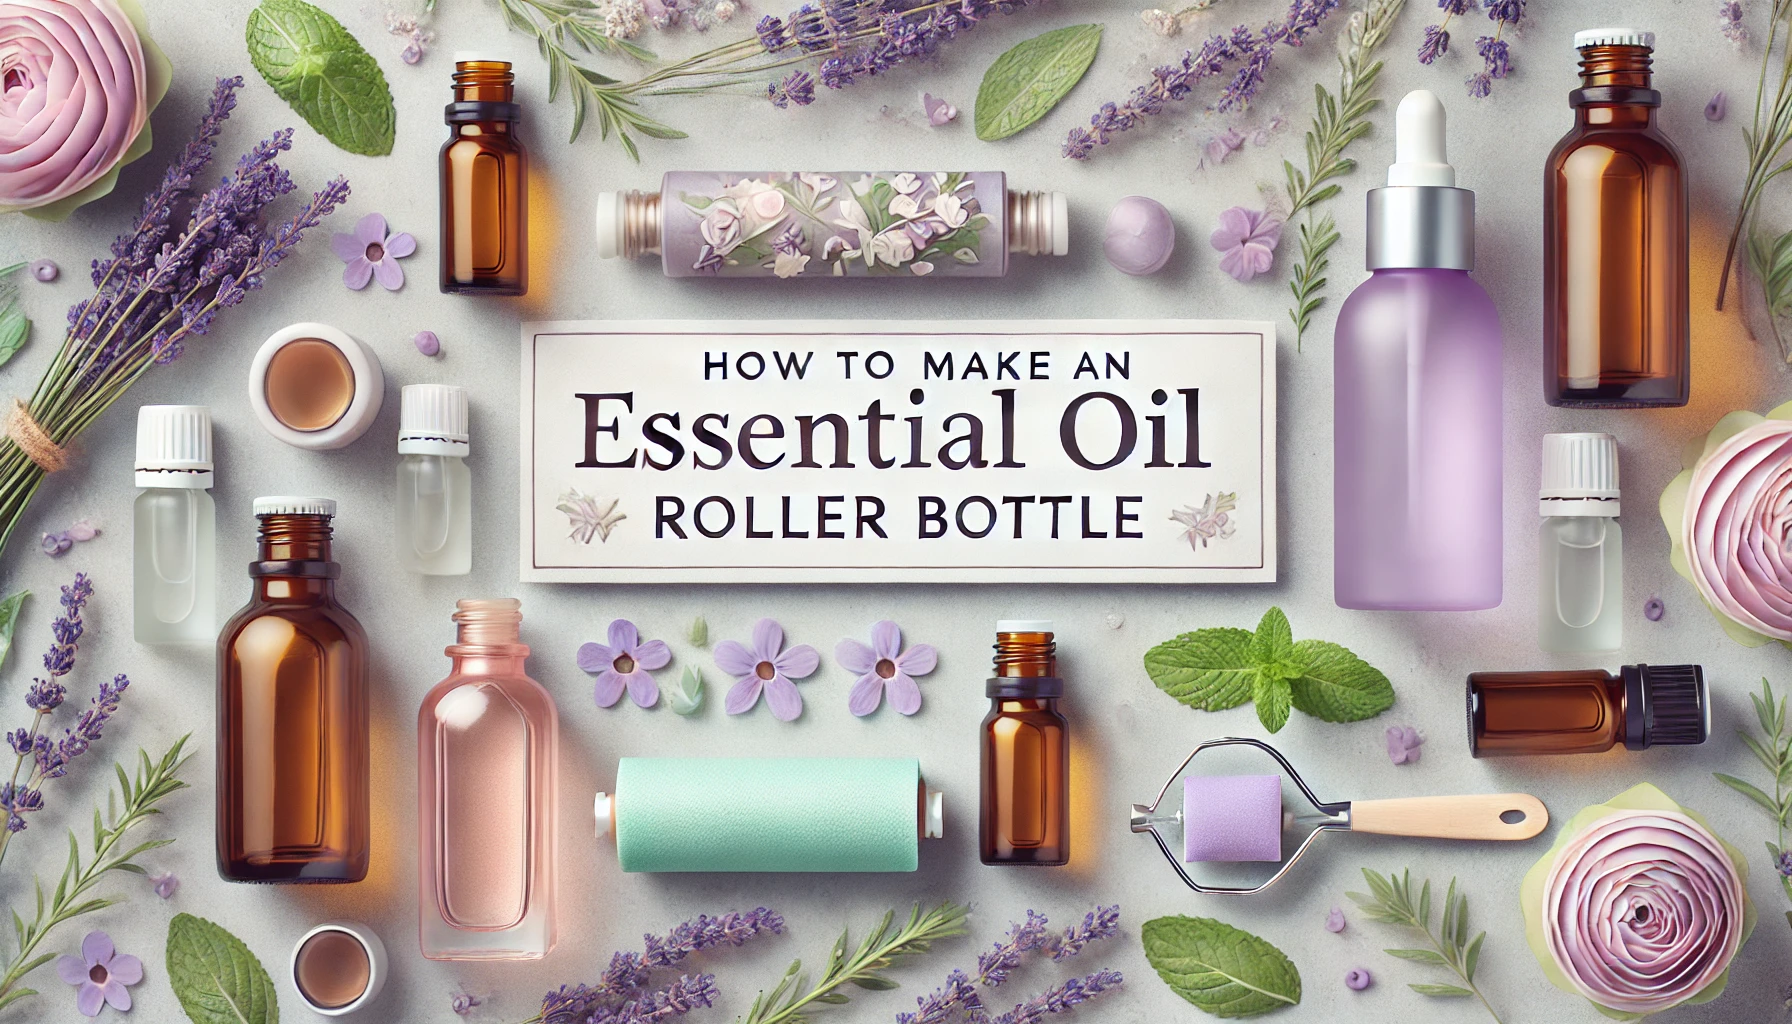 How to Make an Essential Oil Roller Bottle？